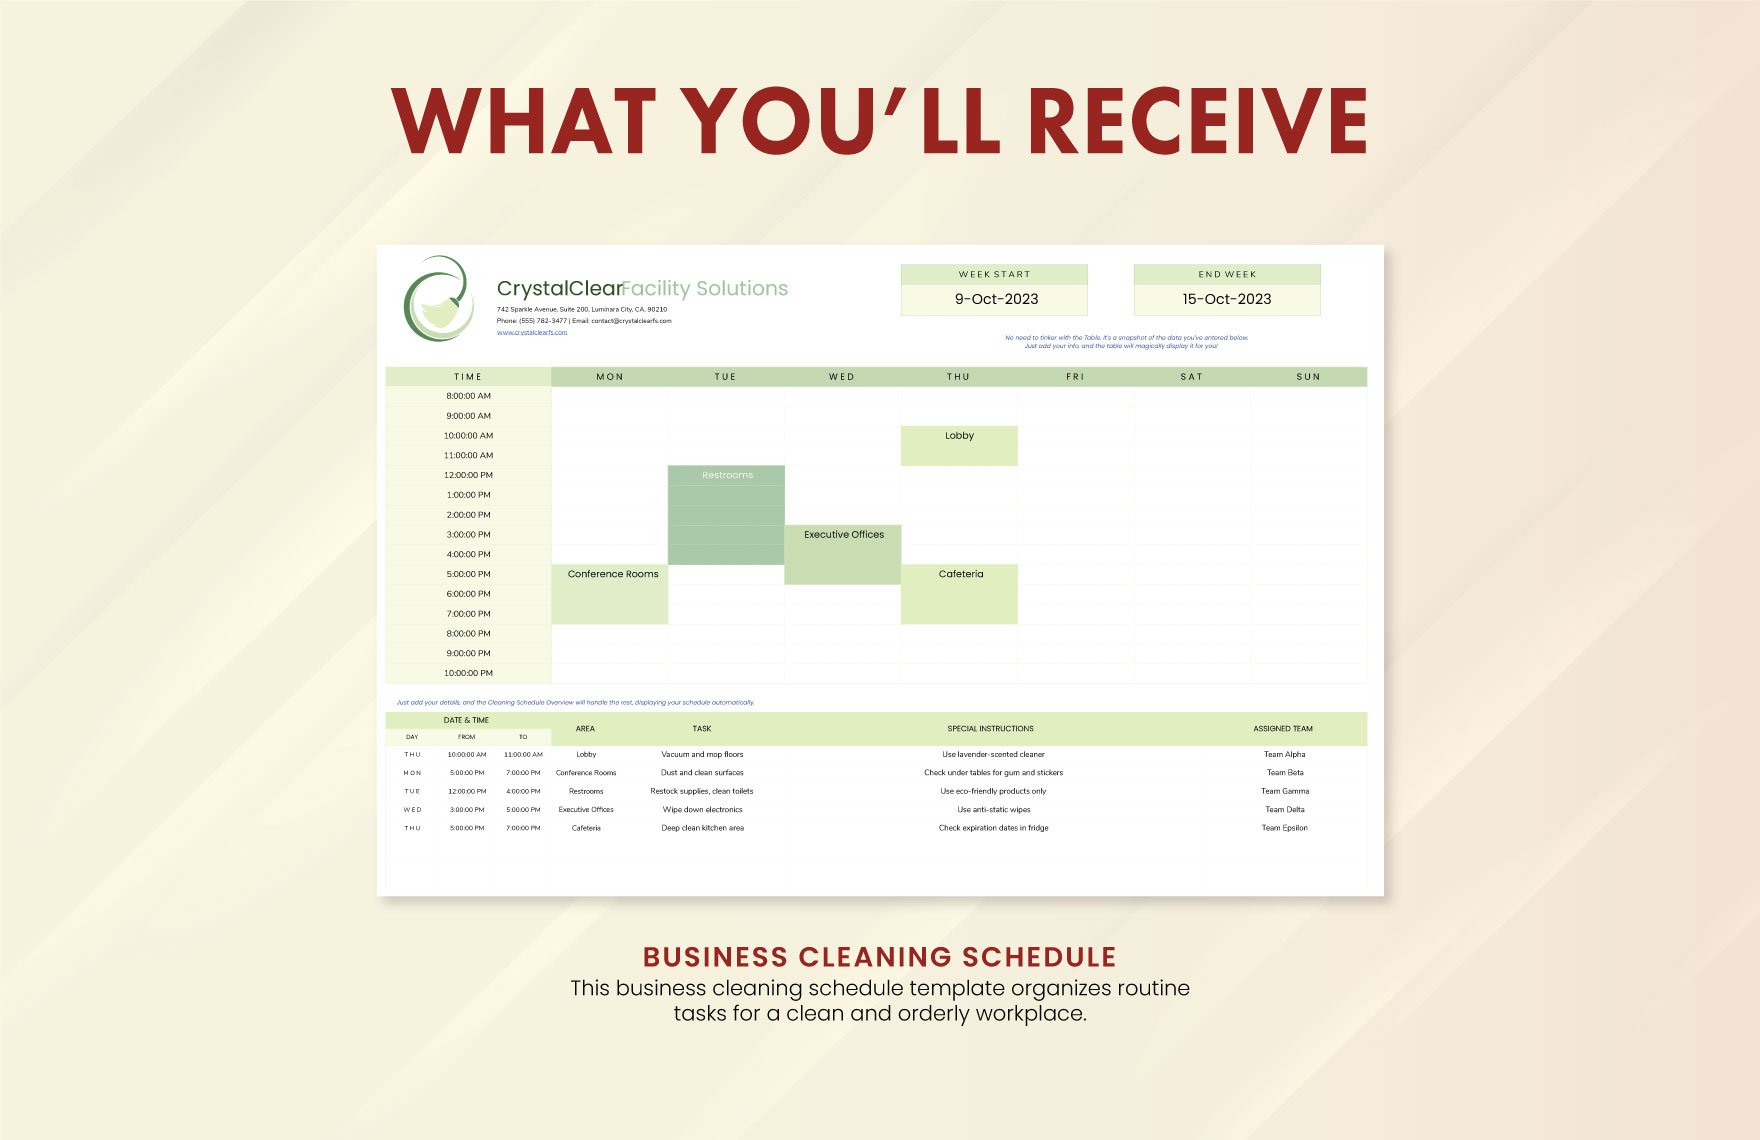 Business Cleaning Schedule Template